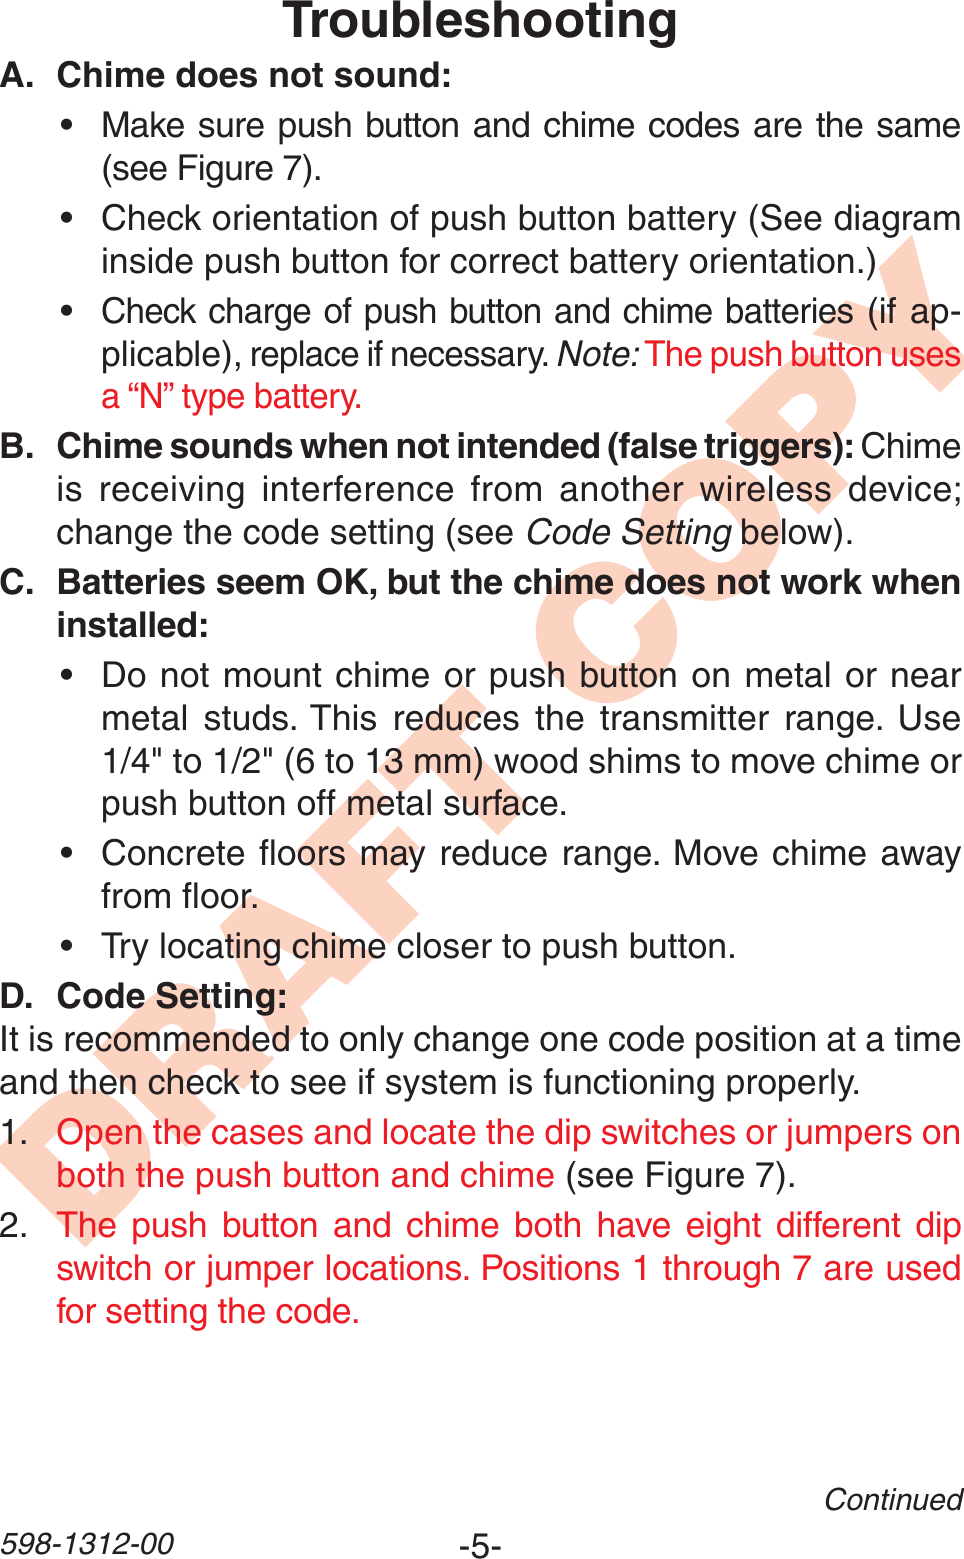 -5-598-1312-00DRAFT COPYContinuedTroubleshootingA. Chime does not sound:• Make sure push button and chime codes are the same (see Figure 7).• Check orientation of push button battery (See diagram inside push button for correct battery orientation.)•Check charge of push button and chime batteries (if ap-plicable), replace if necessary. Note: The push button uses a “N” type battery.B. Chime sounds when not intended (false triggers): Chime is receiving interference from another wireless device; change the code setting (see Code Setting below).C. Batteries seem OK, but the chime does not work when installed:• Do not mount chime or push button on metal or near metal studs. This reduces the transmitter range. Use 1/4&quot; to 1/2&quot; (6 to 13 mm) wood shims to move chime or push button off metal surface.• Concrete ﬂoors may reduce range. Move chime away from ﬂoor.• Try locating chime closer to push button.D. Code Setting:It is recommended to only change one code position at a time and then check to see if system is functioning properly.1. Open the cases and locate the dip switches or jumpers on both the push button and chime (see Figure 7).2. The push button and chime both have eight different dip switch or jumper locations. Positions 1 through 7 are used for setting the code.